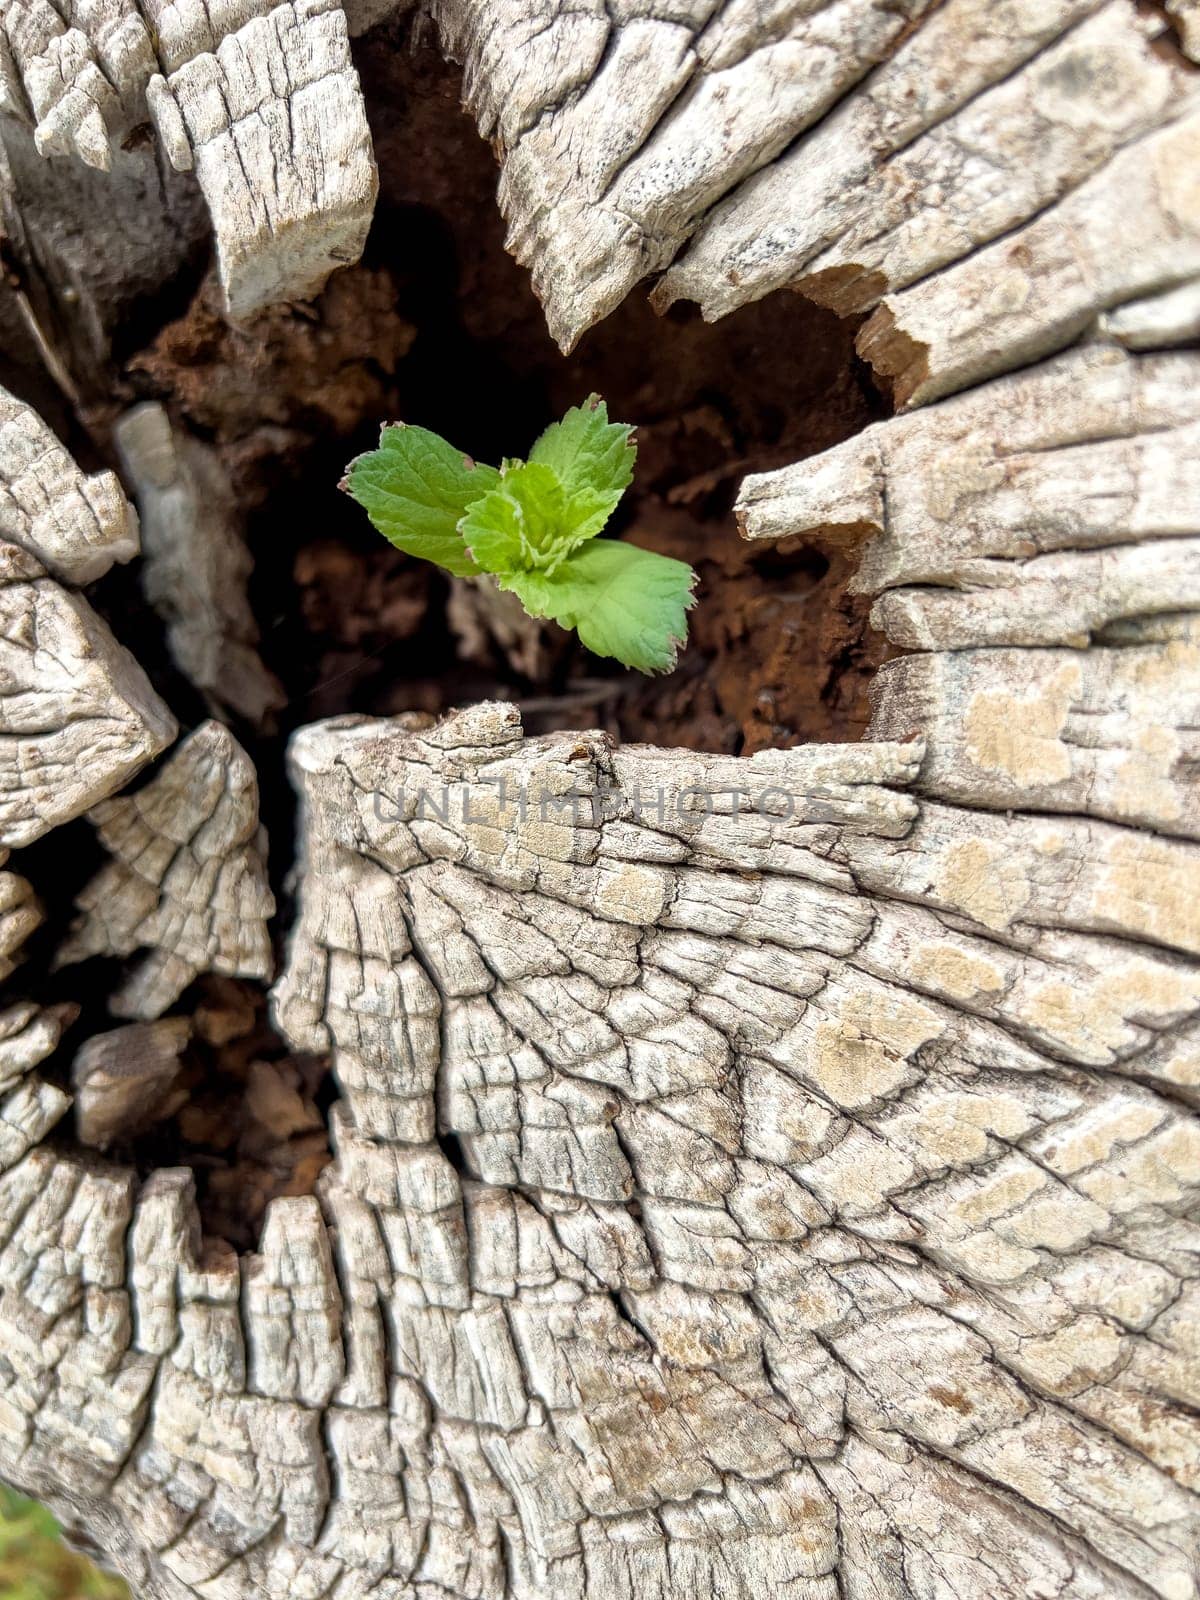 Plant growing in the middle of a cut tree stump by Sonat